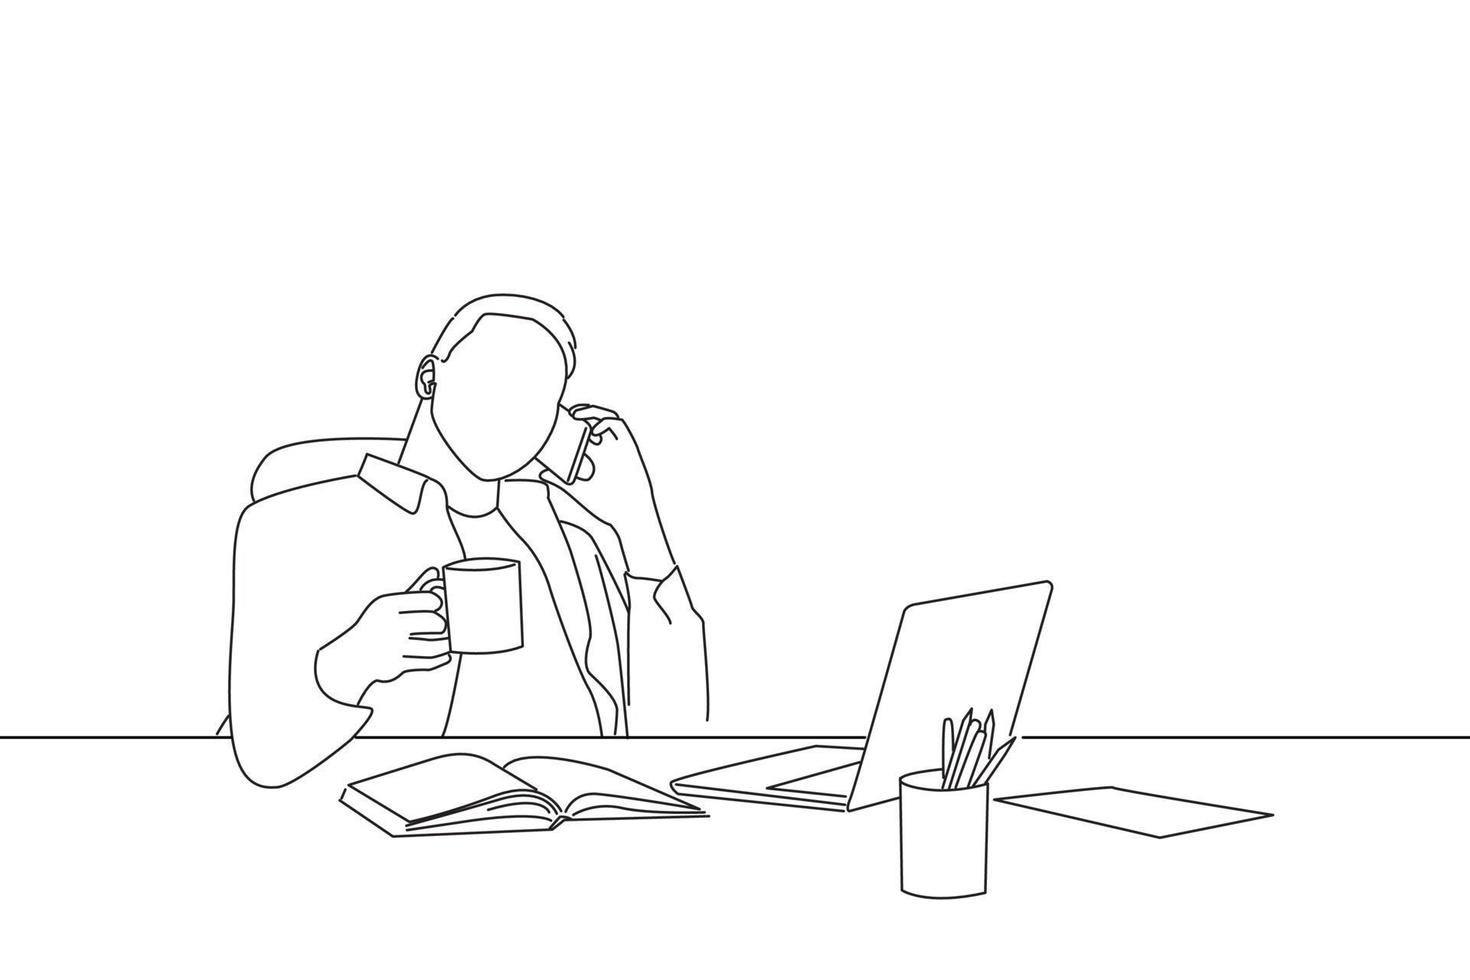 Cartoon of cheerful employee talking on phone and holding cup with hot drink having coffee break. Line art style vector